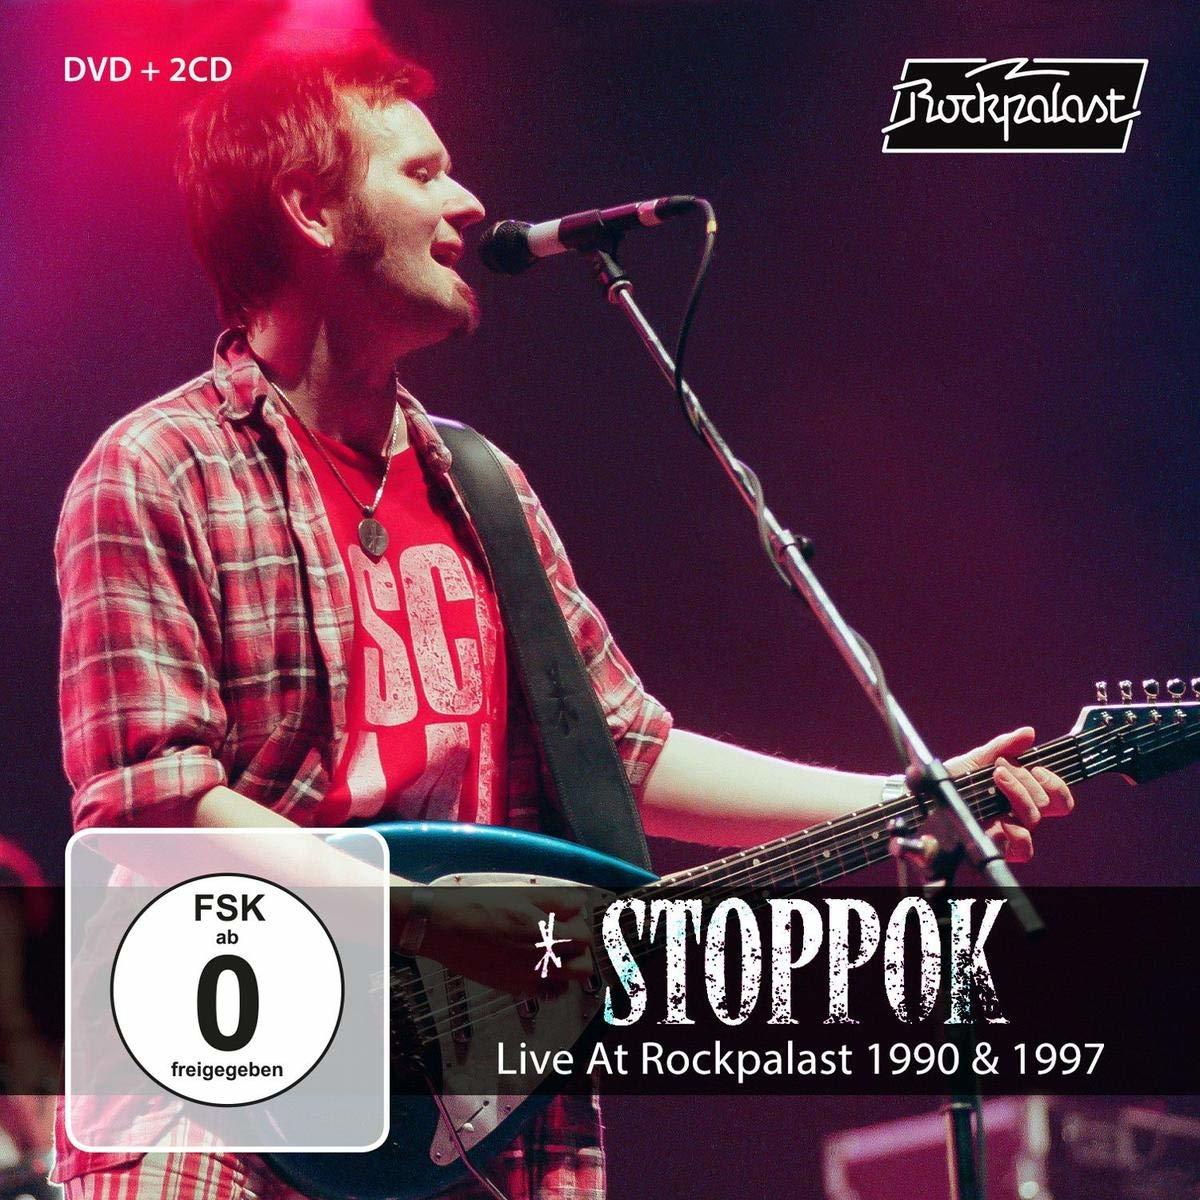 Video) Rockpalast At Live 1990 - STOPPOK DVD (CD - + (2CD,DVD) & 1997